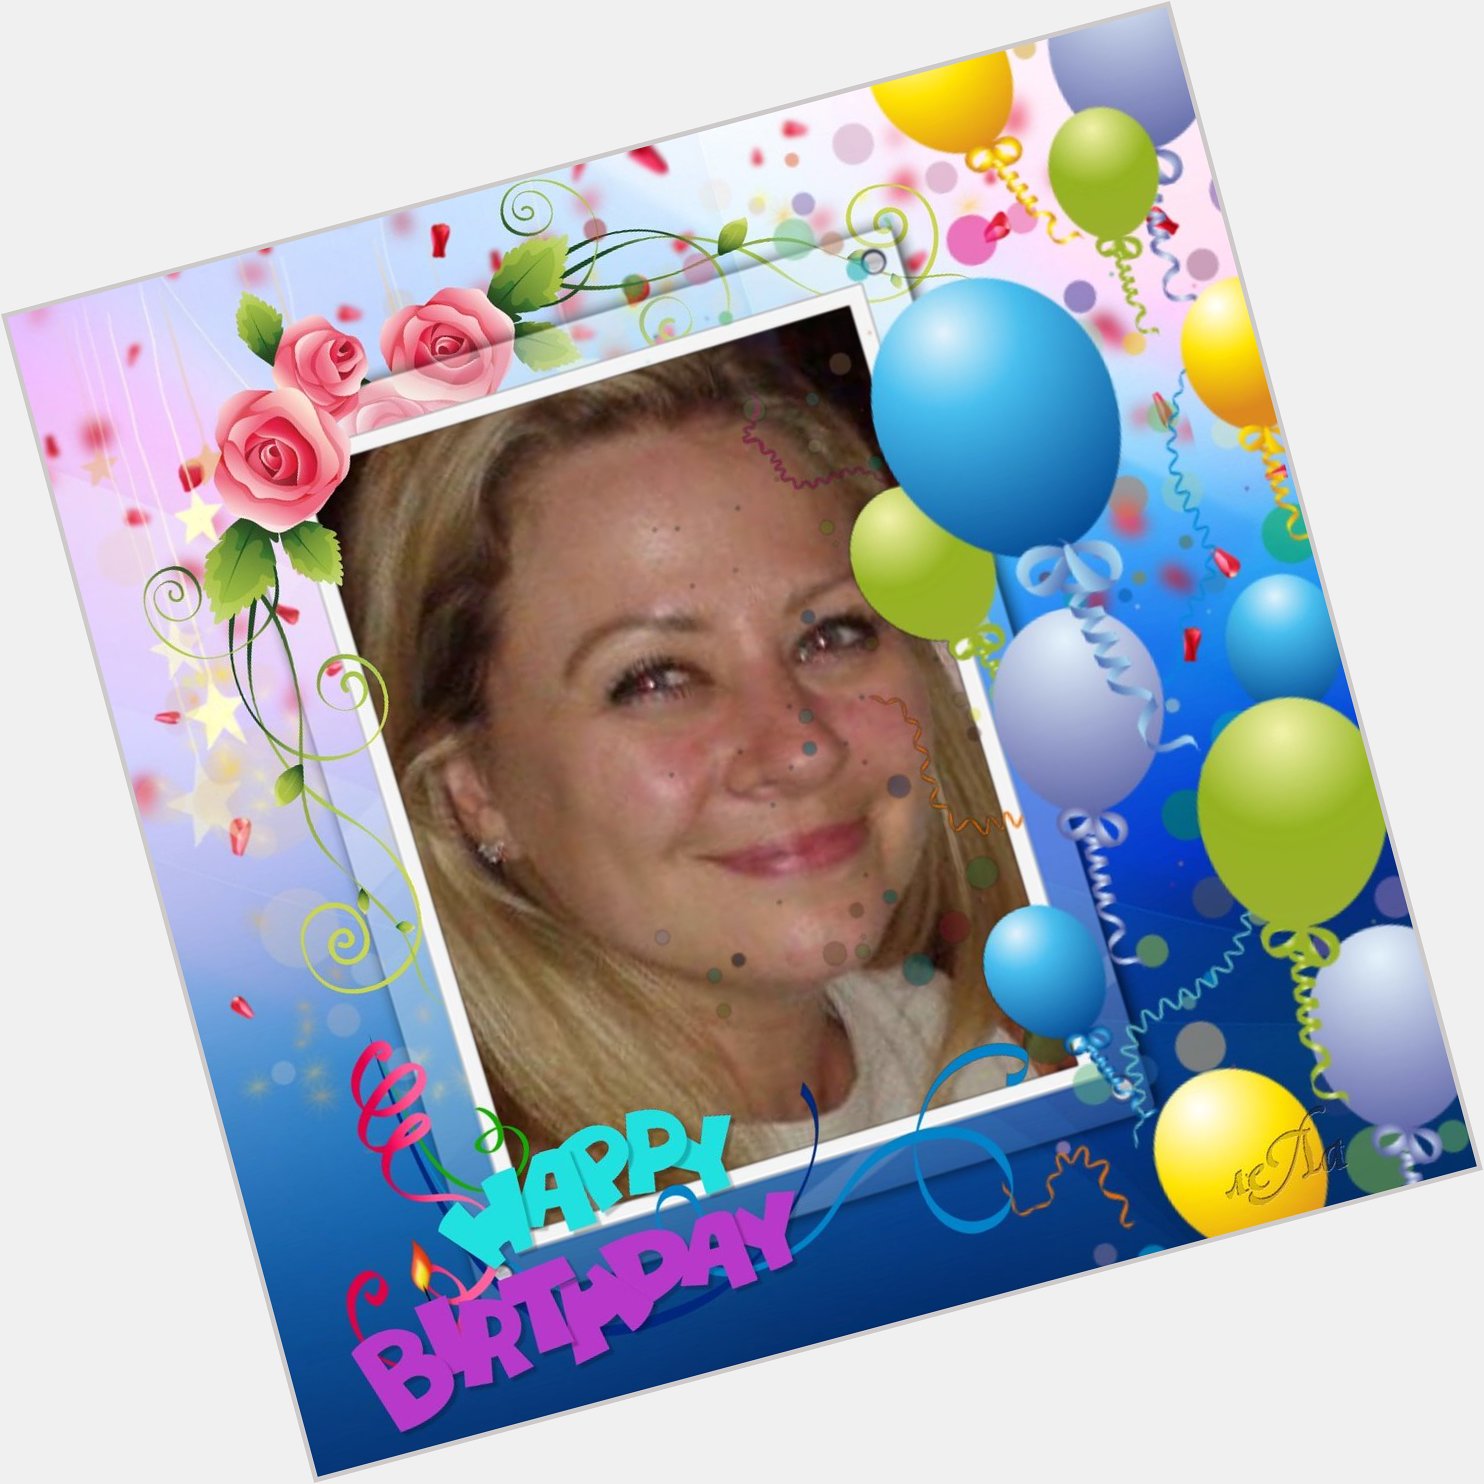 Wishing My friend Adele a very happy birthday today hope she has a great day xx 